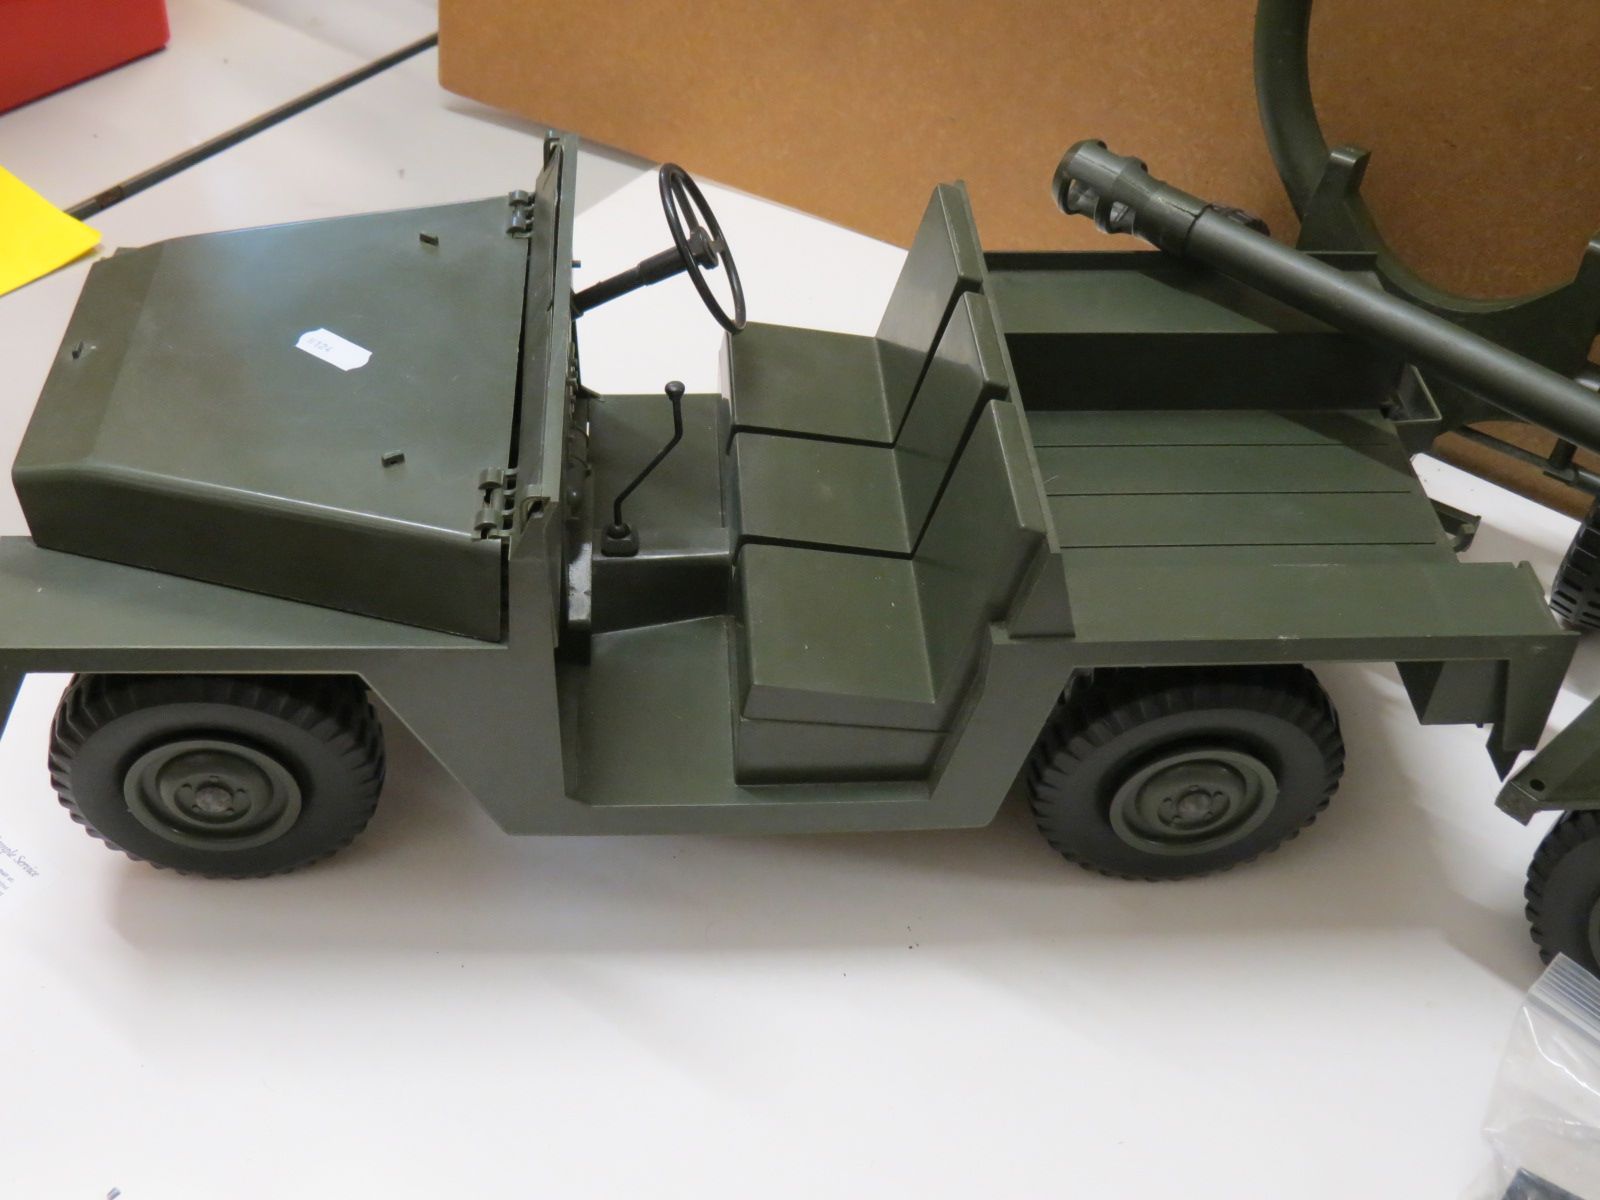 Two original Palitoy Action Man vehicles to include Army Landrover and 105mm Light Gun, with - Image 2 of 5